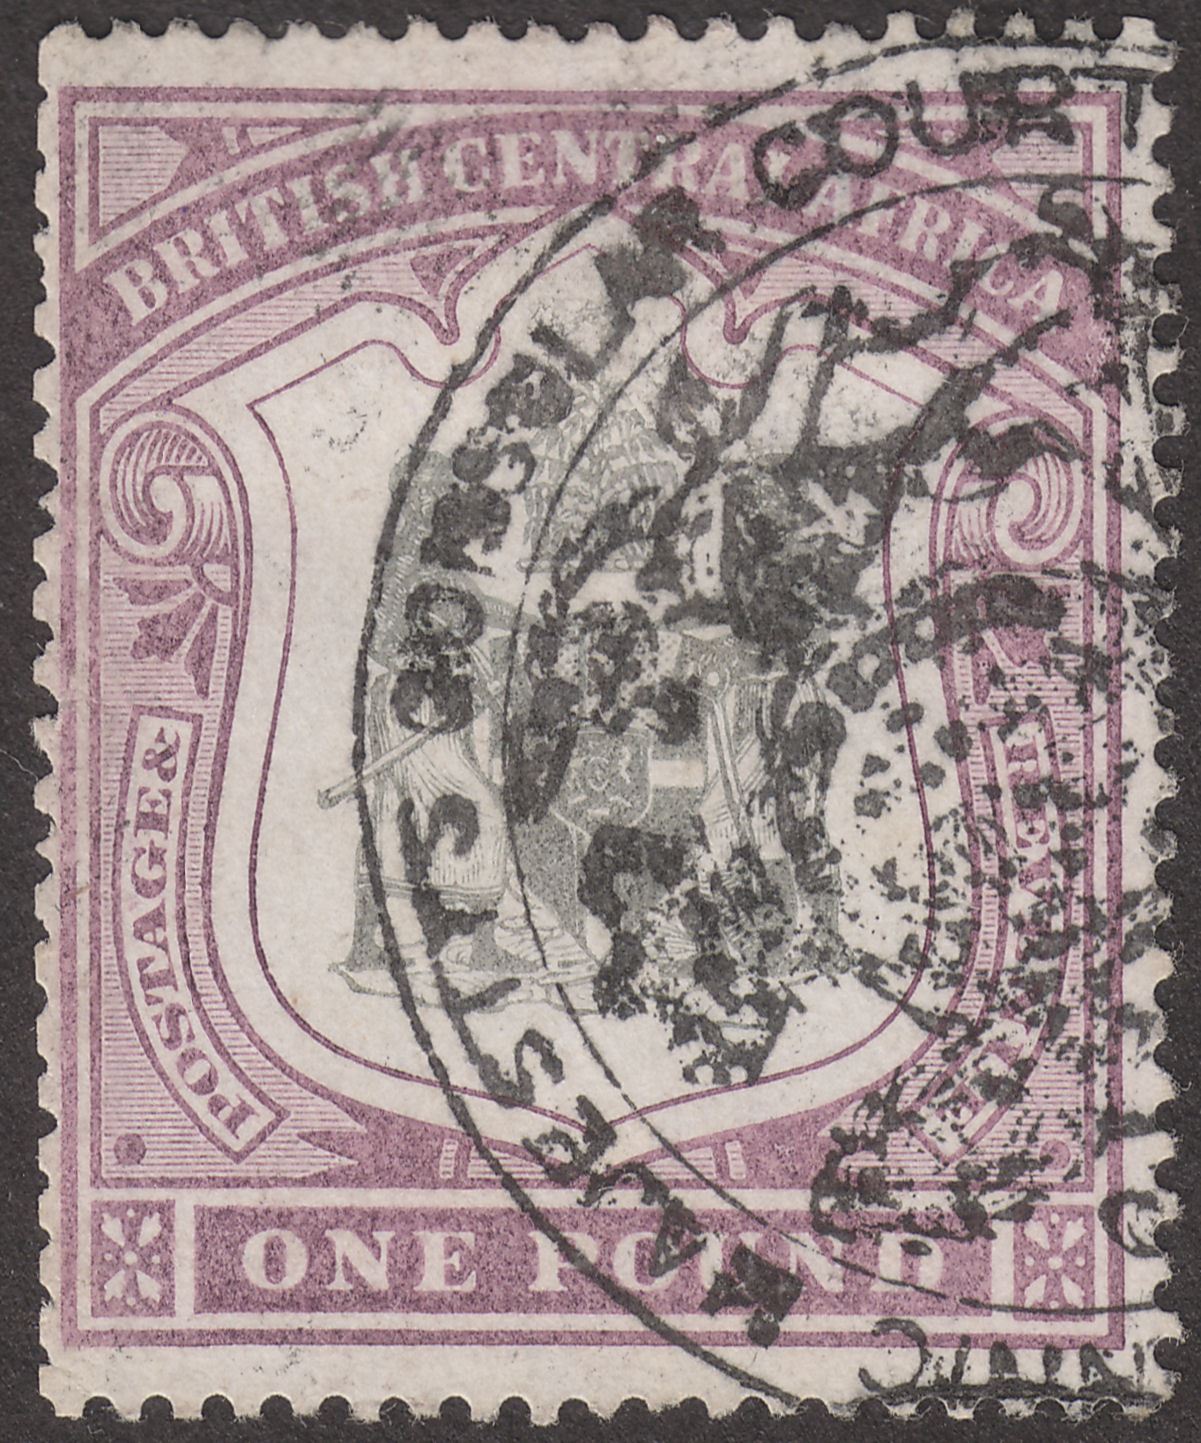 British Central Africa 1897 QV £1 Fiscally Used SG51 c£350 as Postal